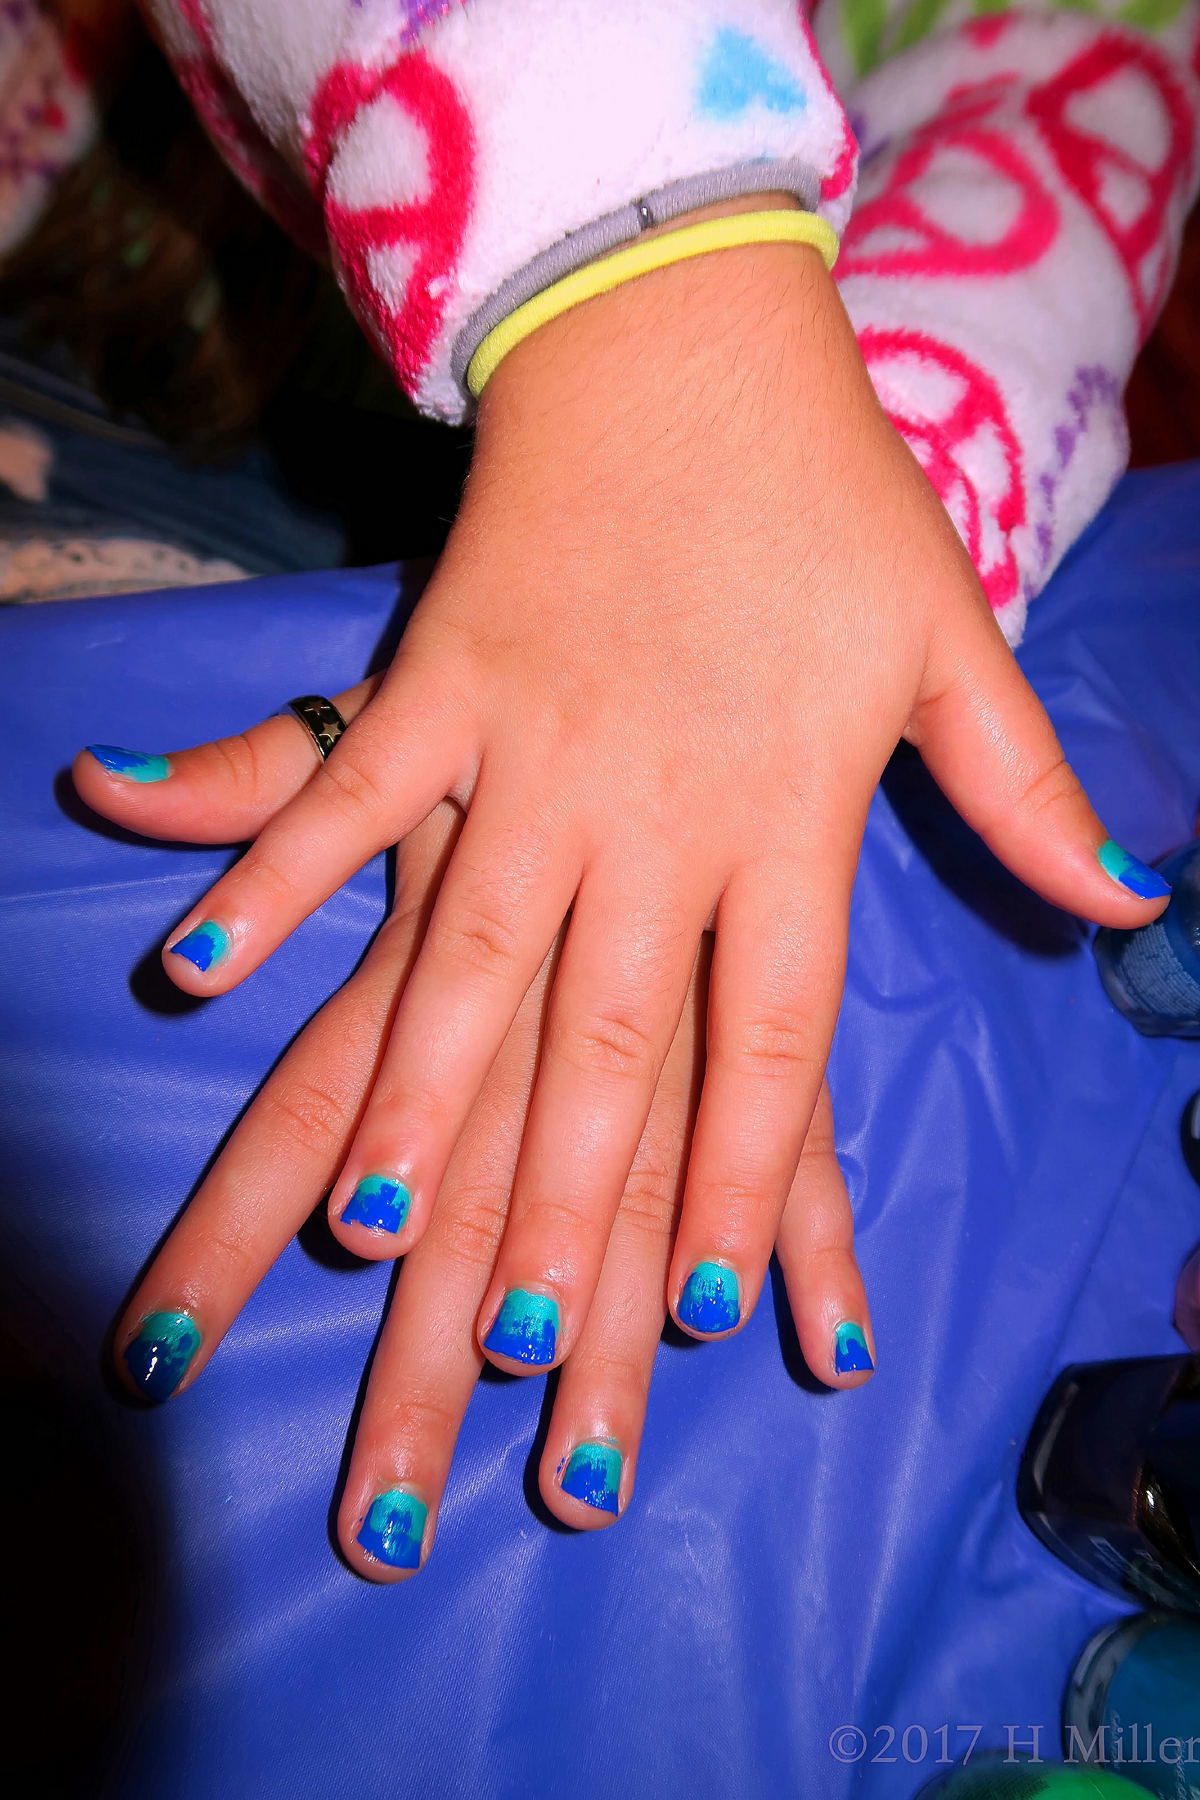 Loving Such A Colorful Girls Manicure! 